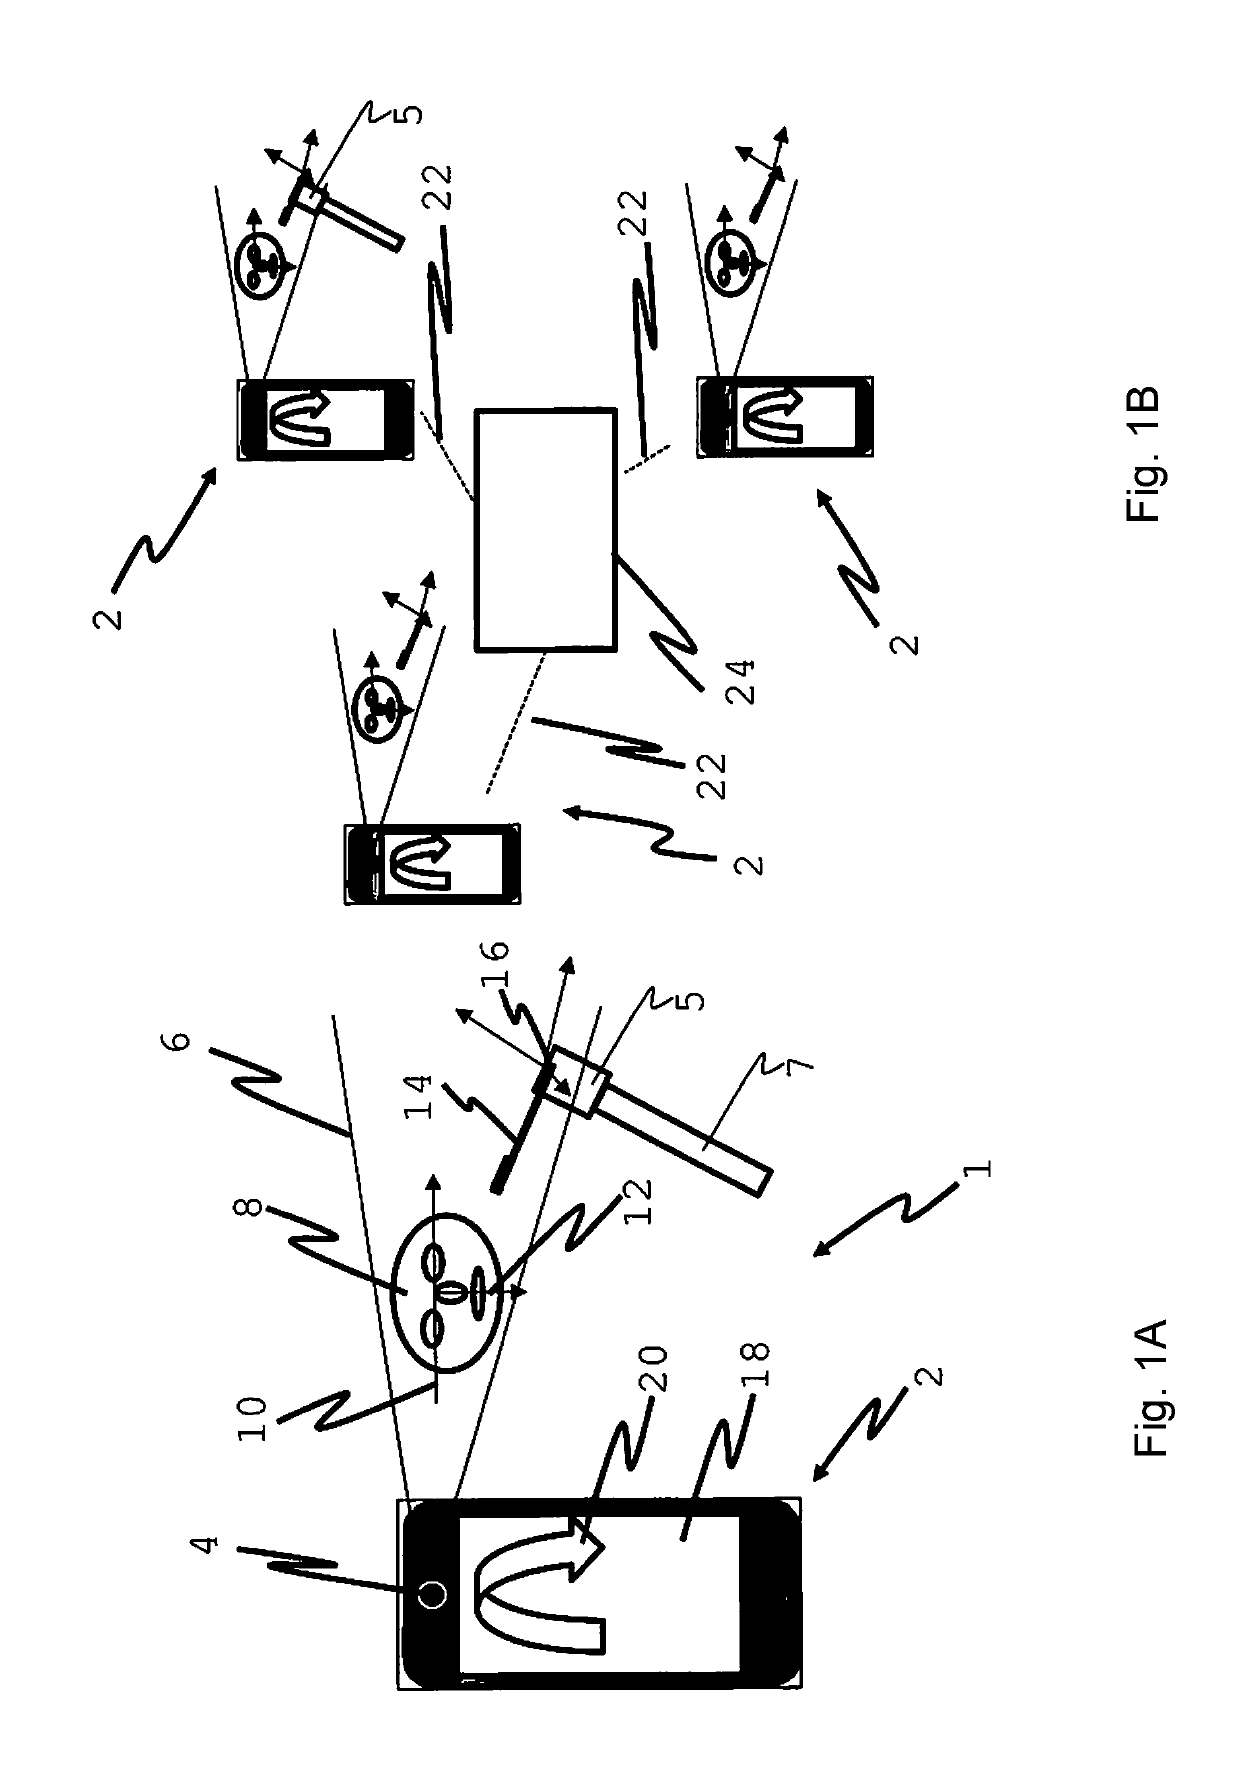 Method for determining movement patterns during a dental treatment